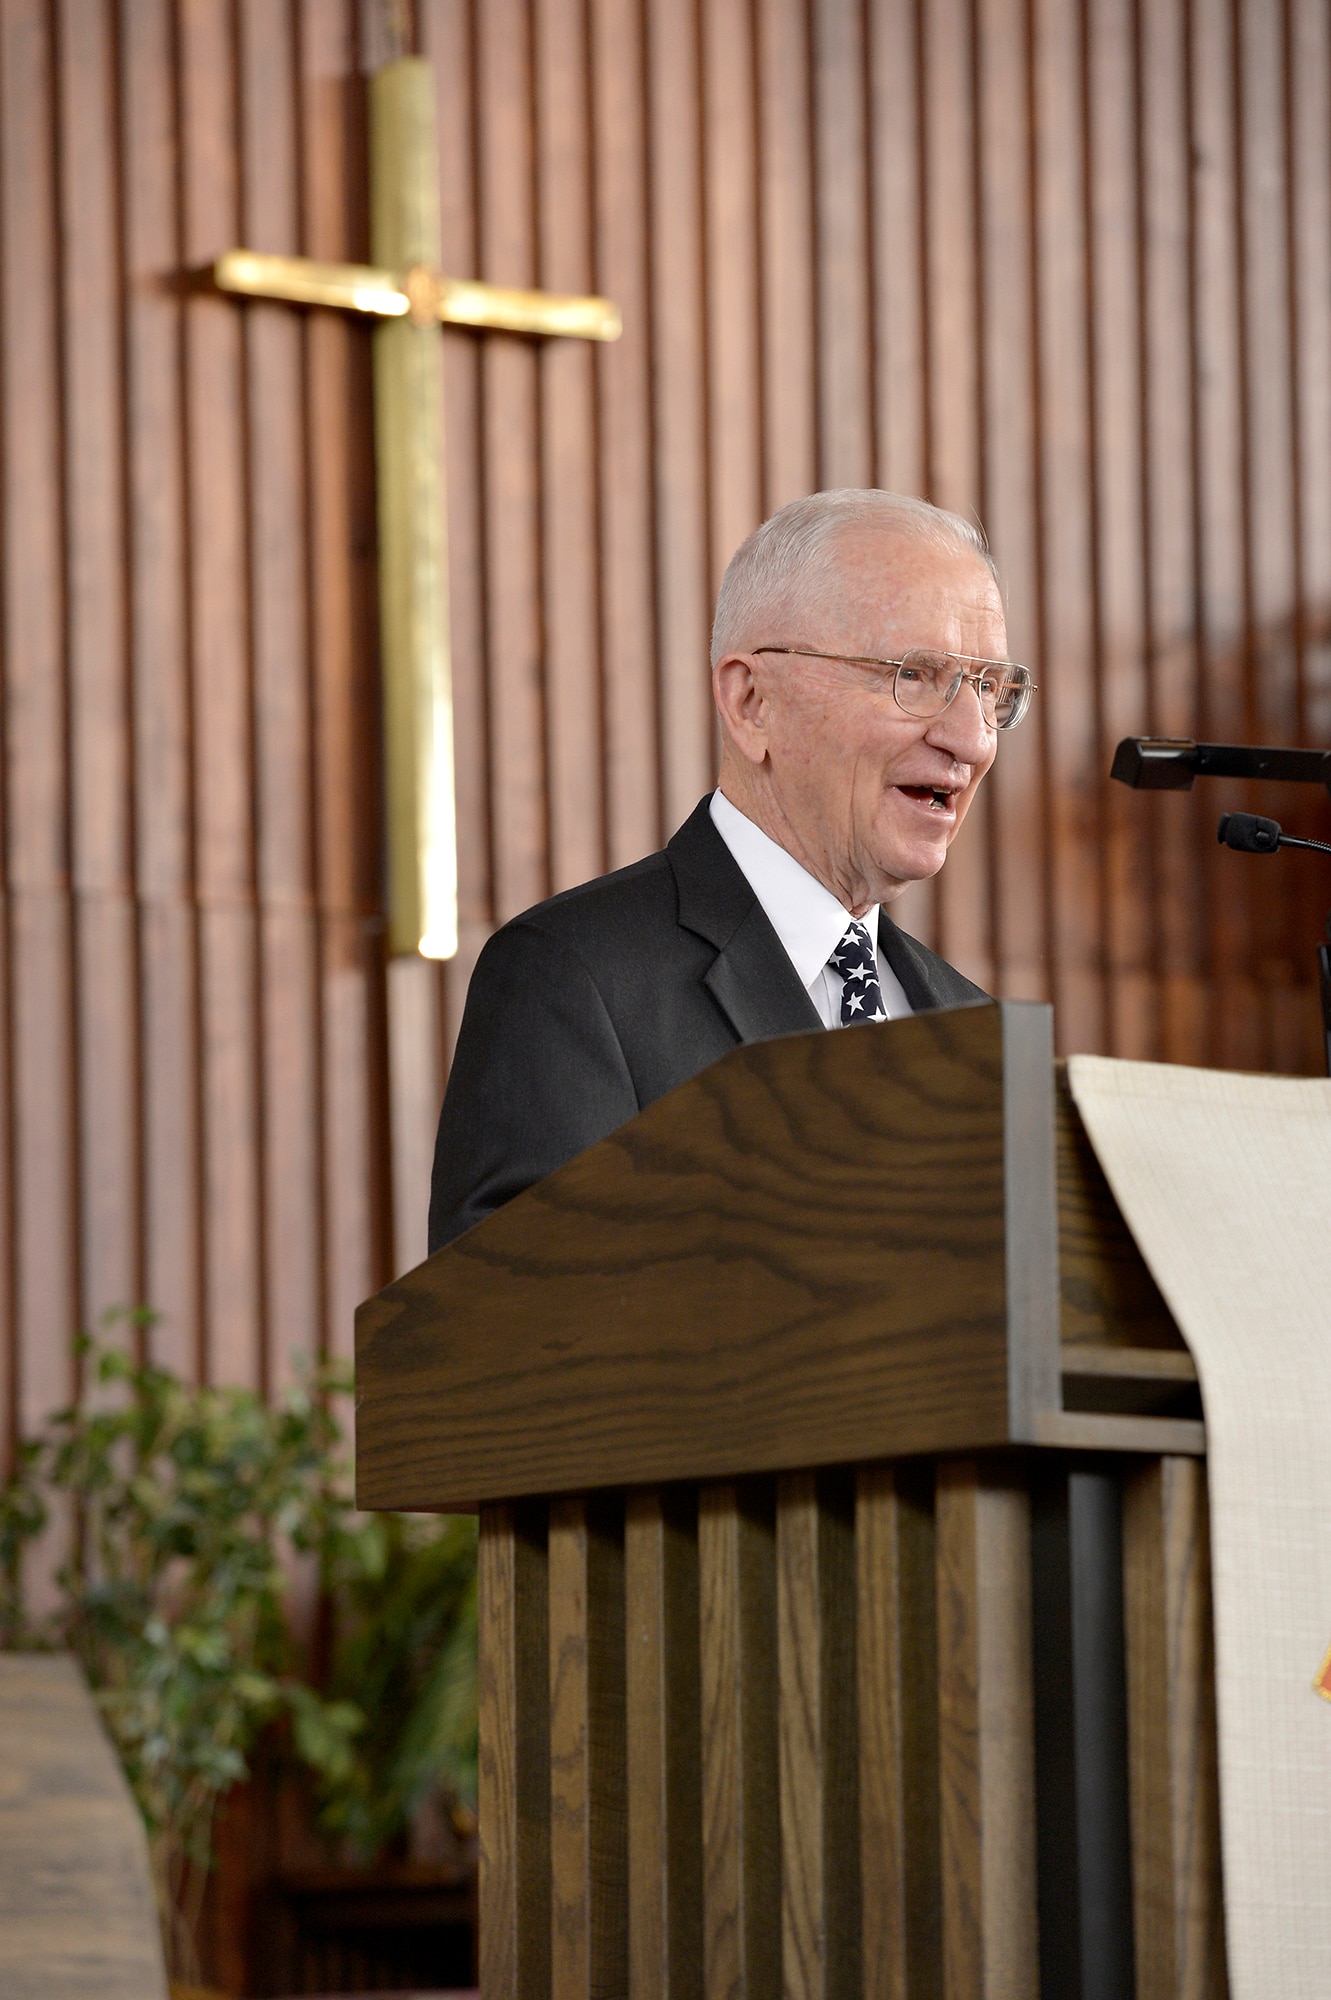 Ross Perot speaks at the internment ceremony for Brig. Gen. Robinson "Robbie" Risner Jan. 23, 2014, at the Memorial chapel on Fort Myer, Arlington, Va., before being laid to rest at Arlington National Cemetery. Risner was one of the most celebrated pilots in Air Force history and survived seven and a half years of captivity in Hoa Lo Prison, also known as the Hanoi Hilton. (U.S. Air Force photo/Michael J. Pausic)